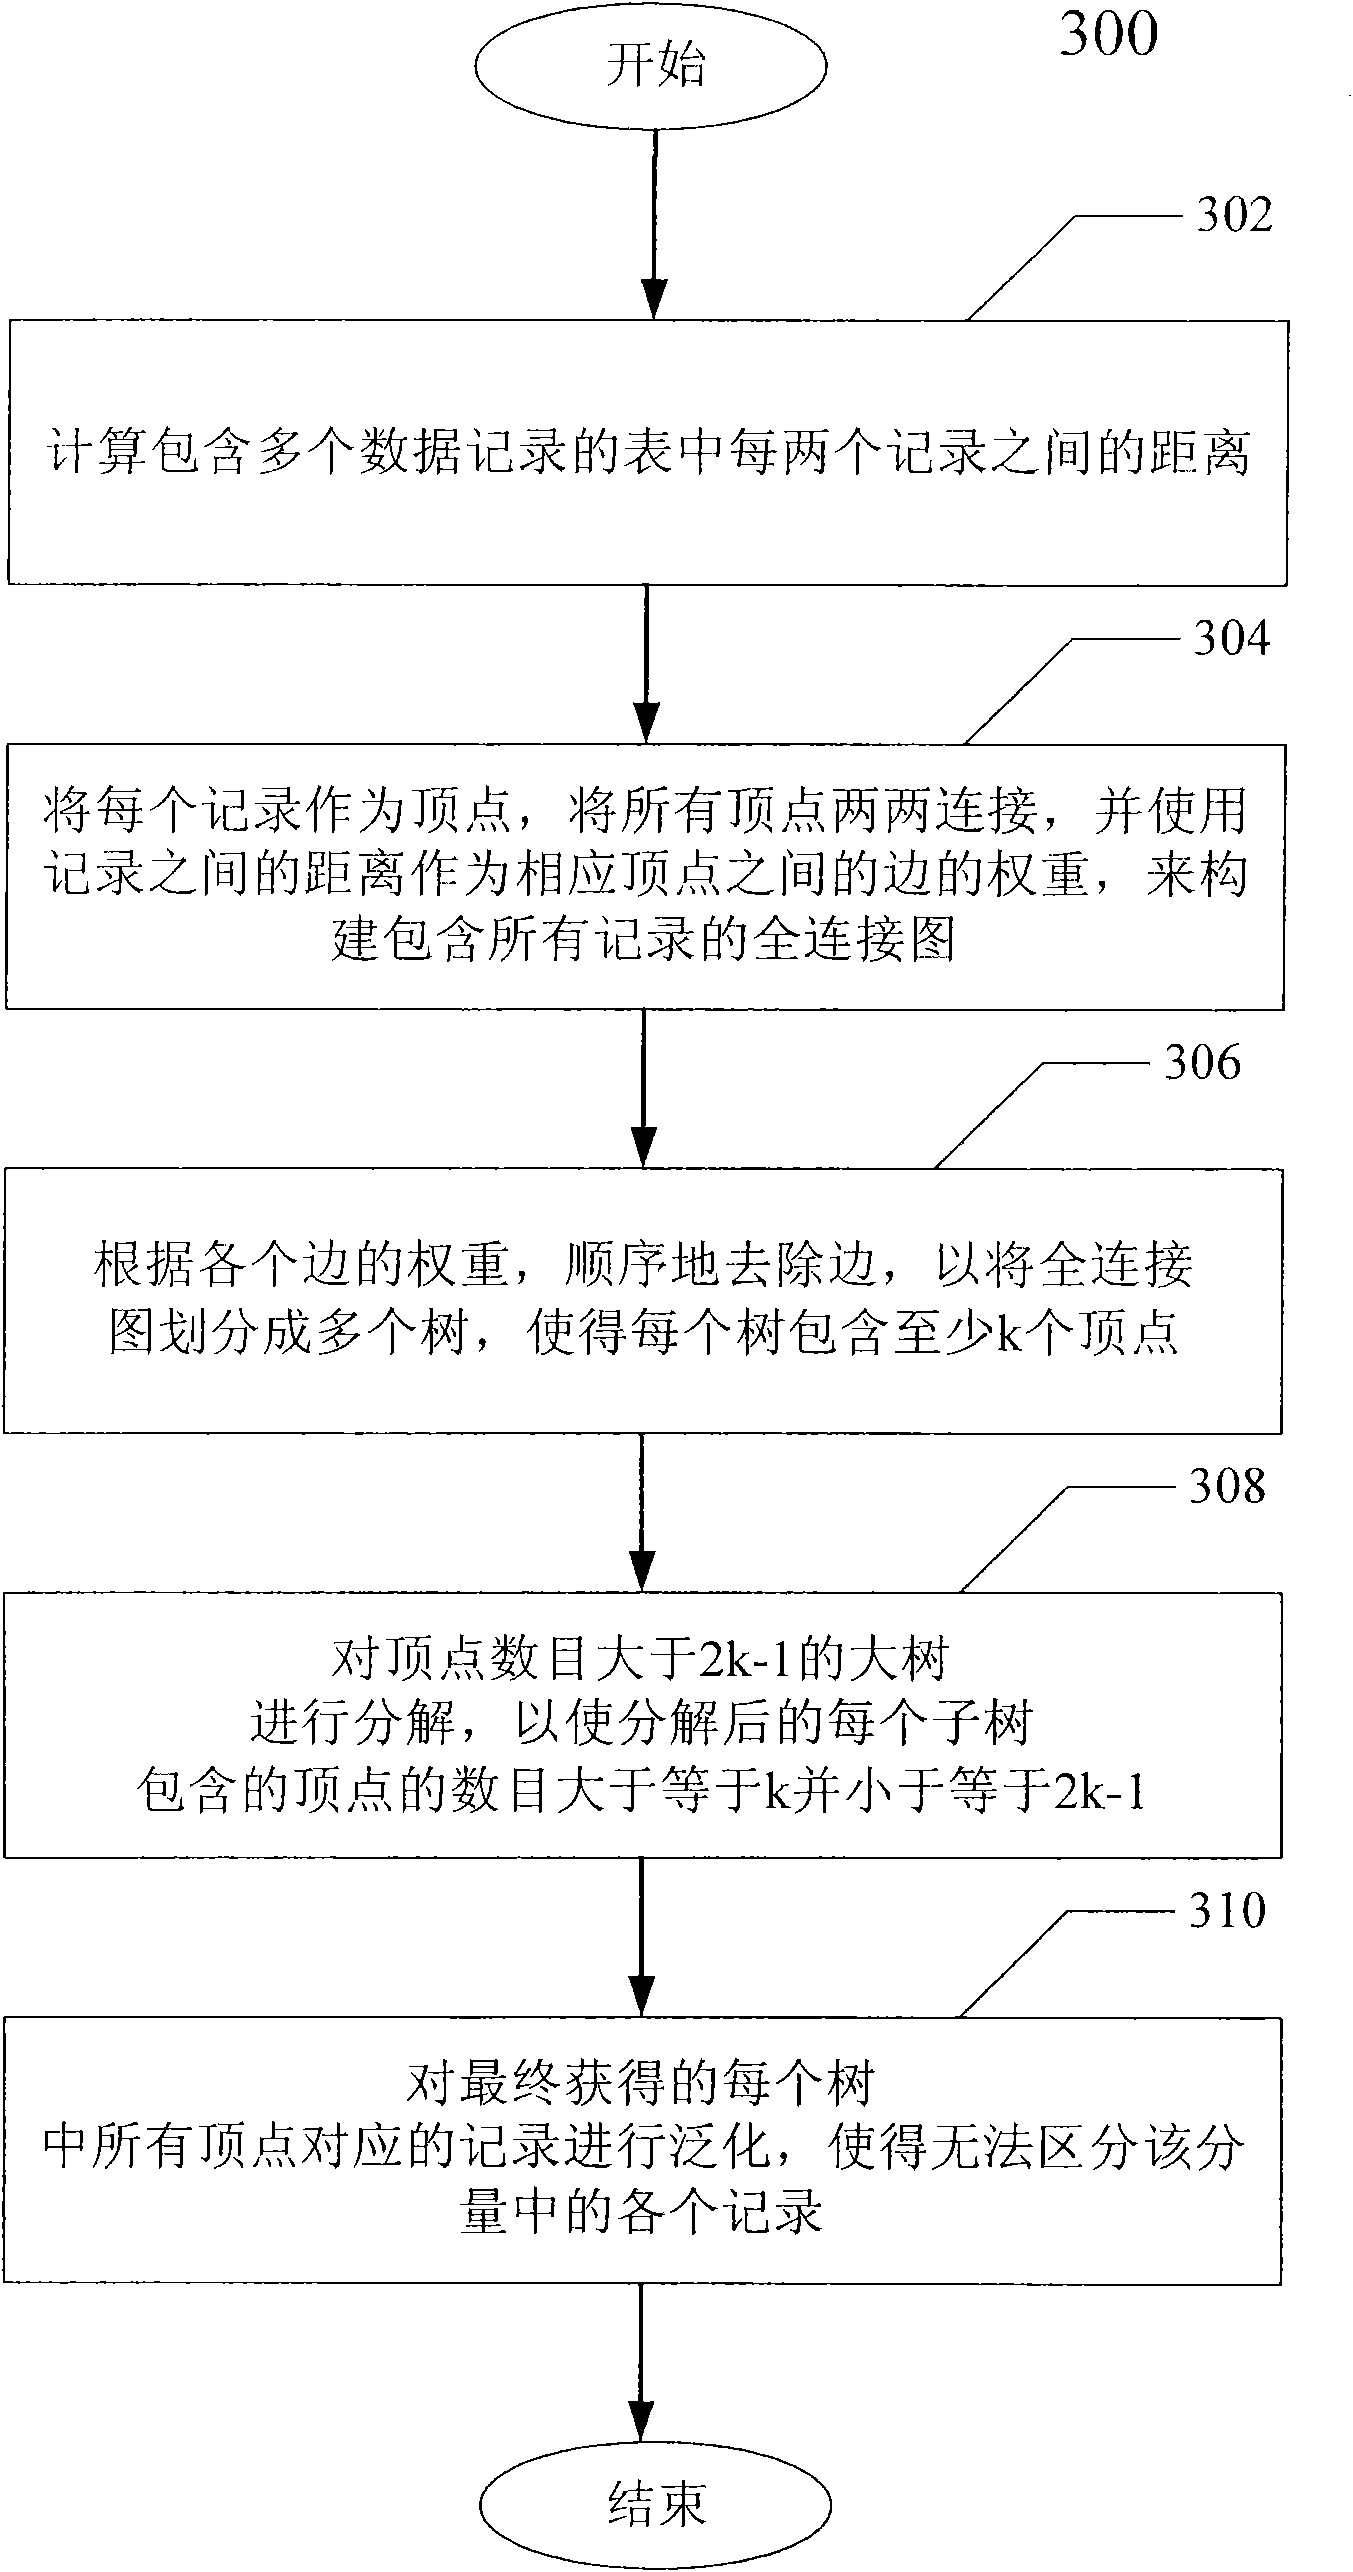 Data anonymization device and method